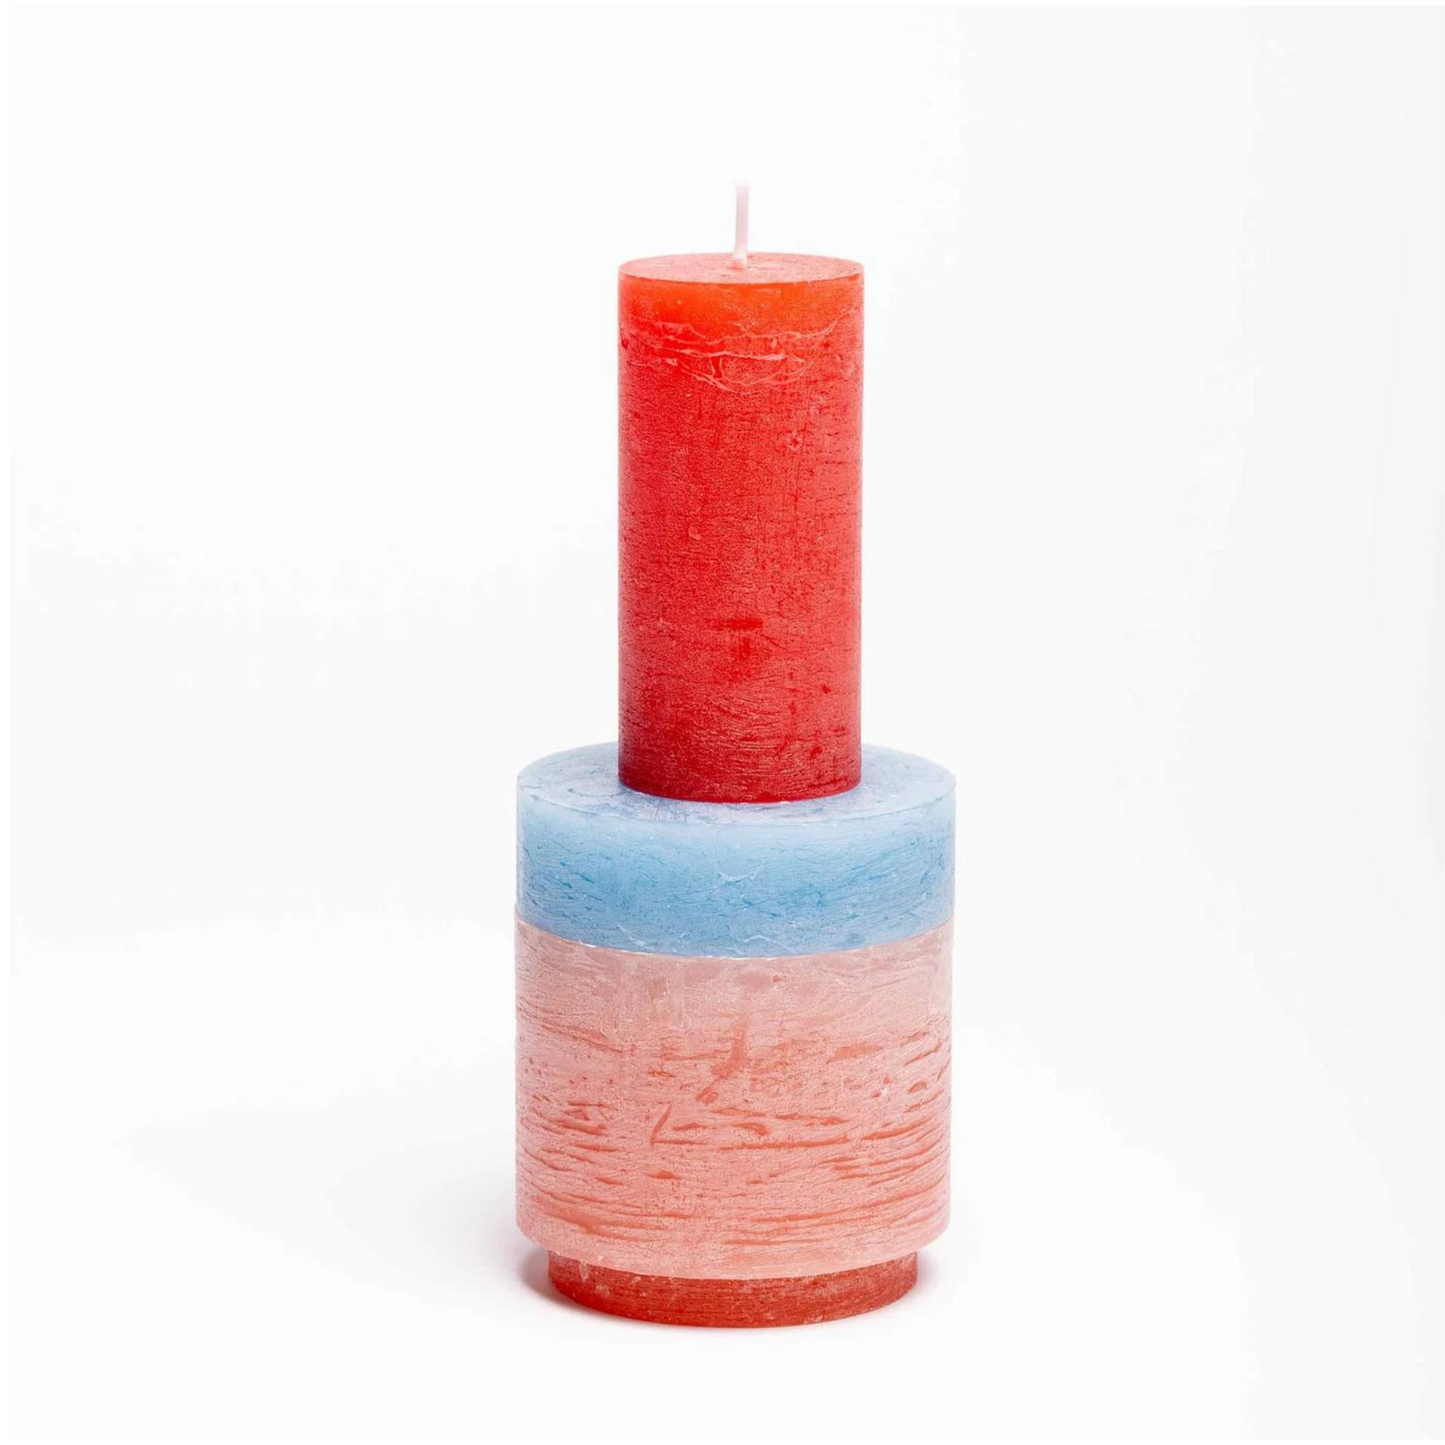  candle made up of 3 different colour components, stacked vertically.